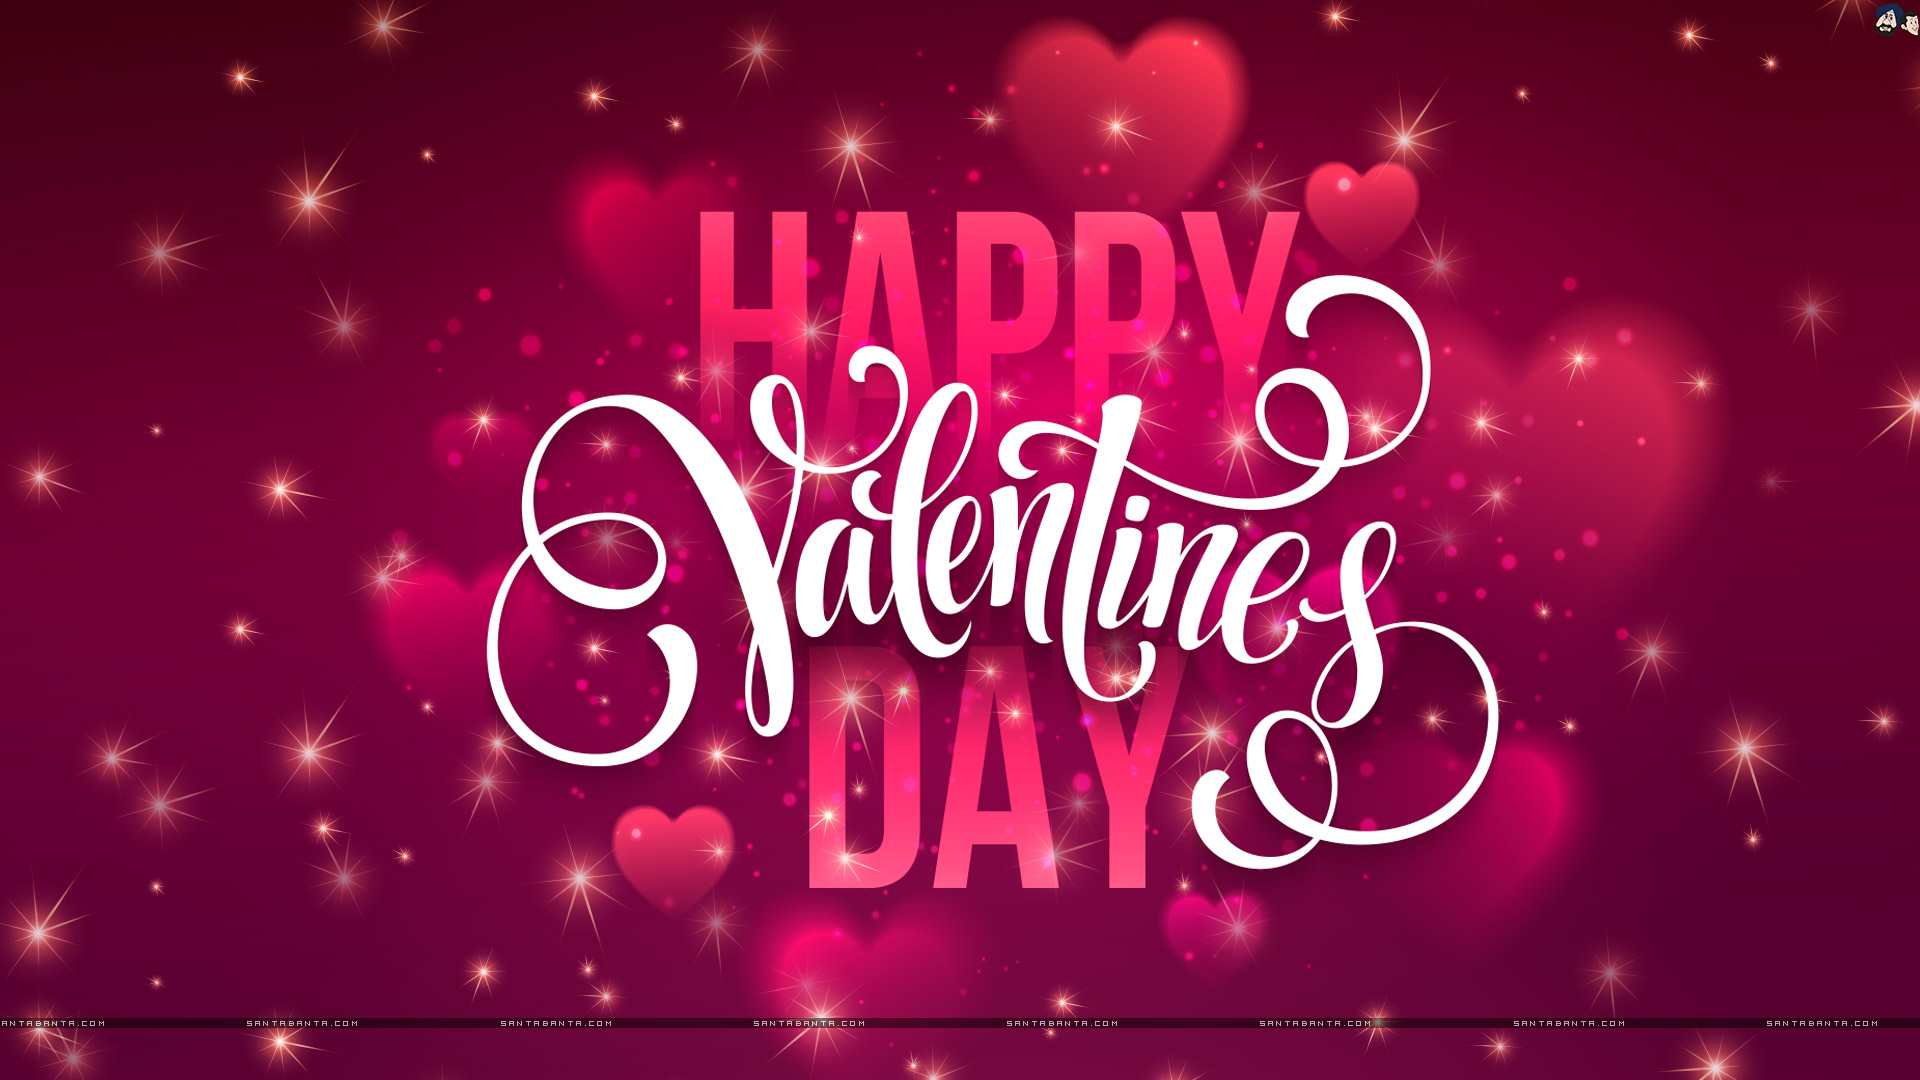 Valentines` Day Wallpaper For Your Mobile & Desktop - Happy Valentine's Day 2020 - HD Wallpaper 